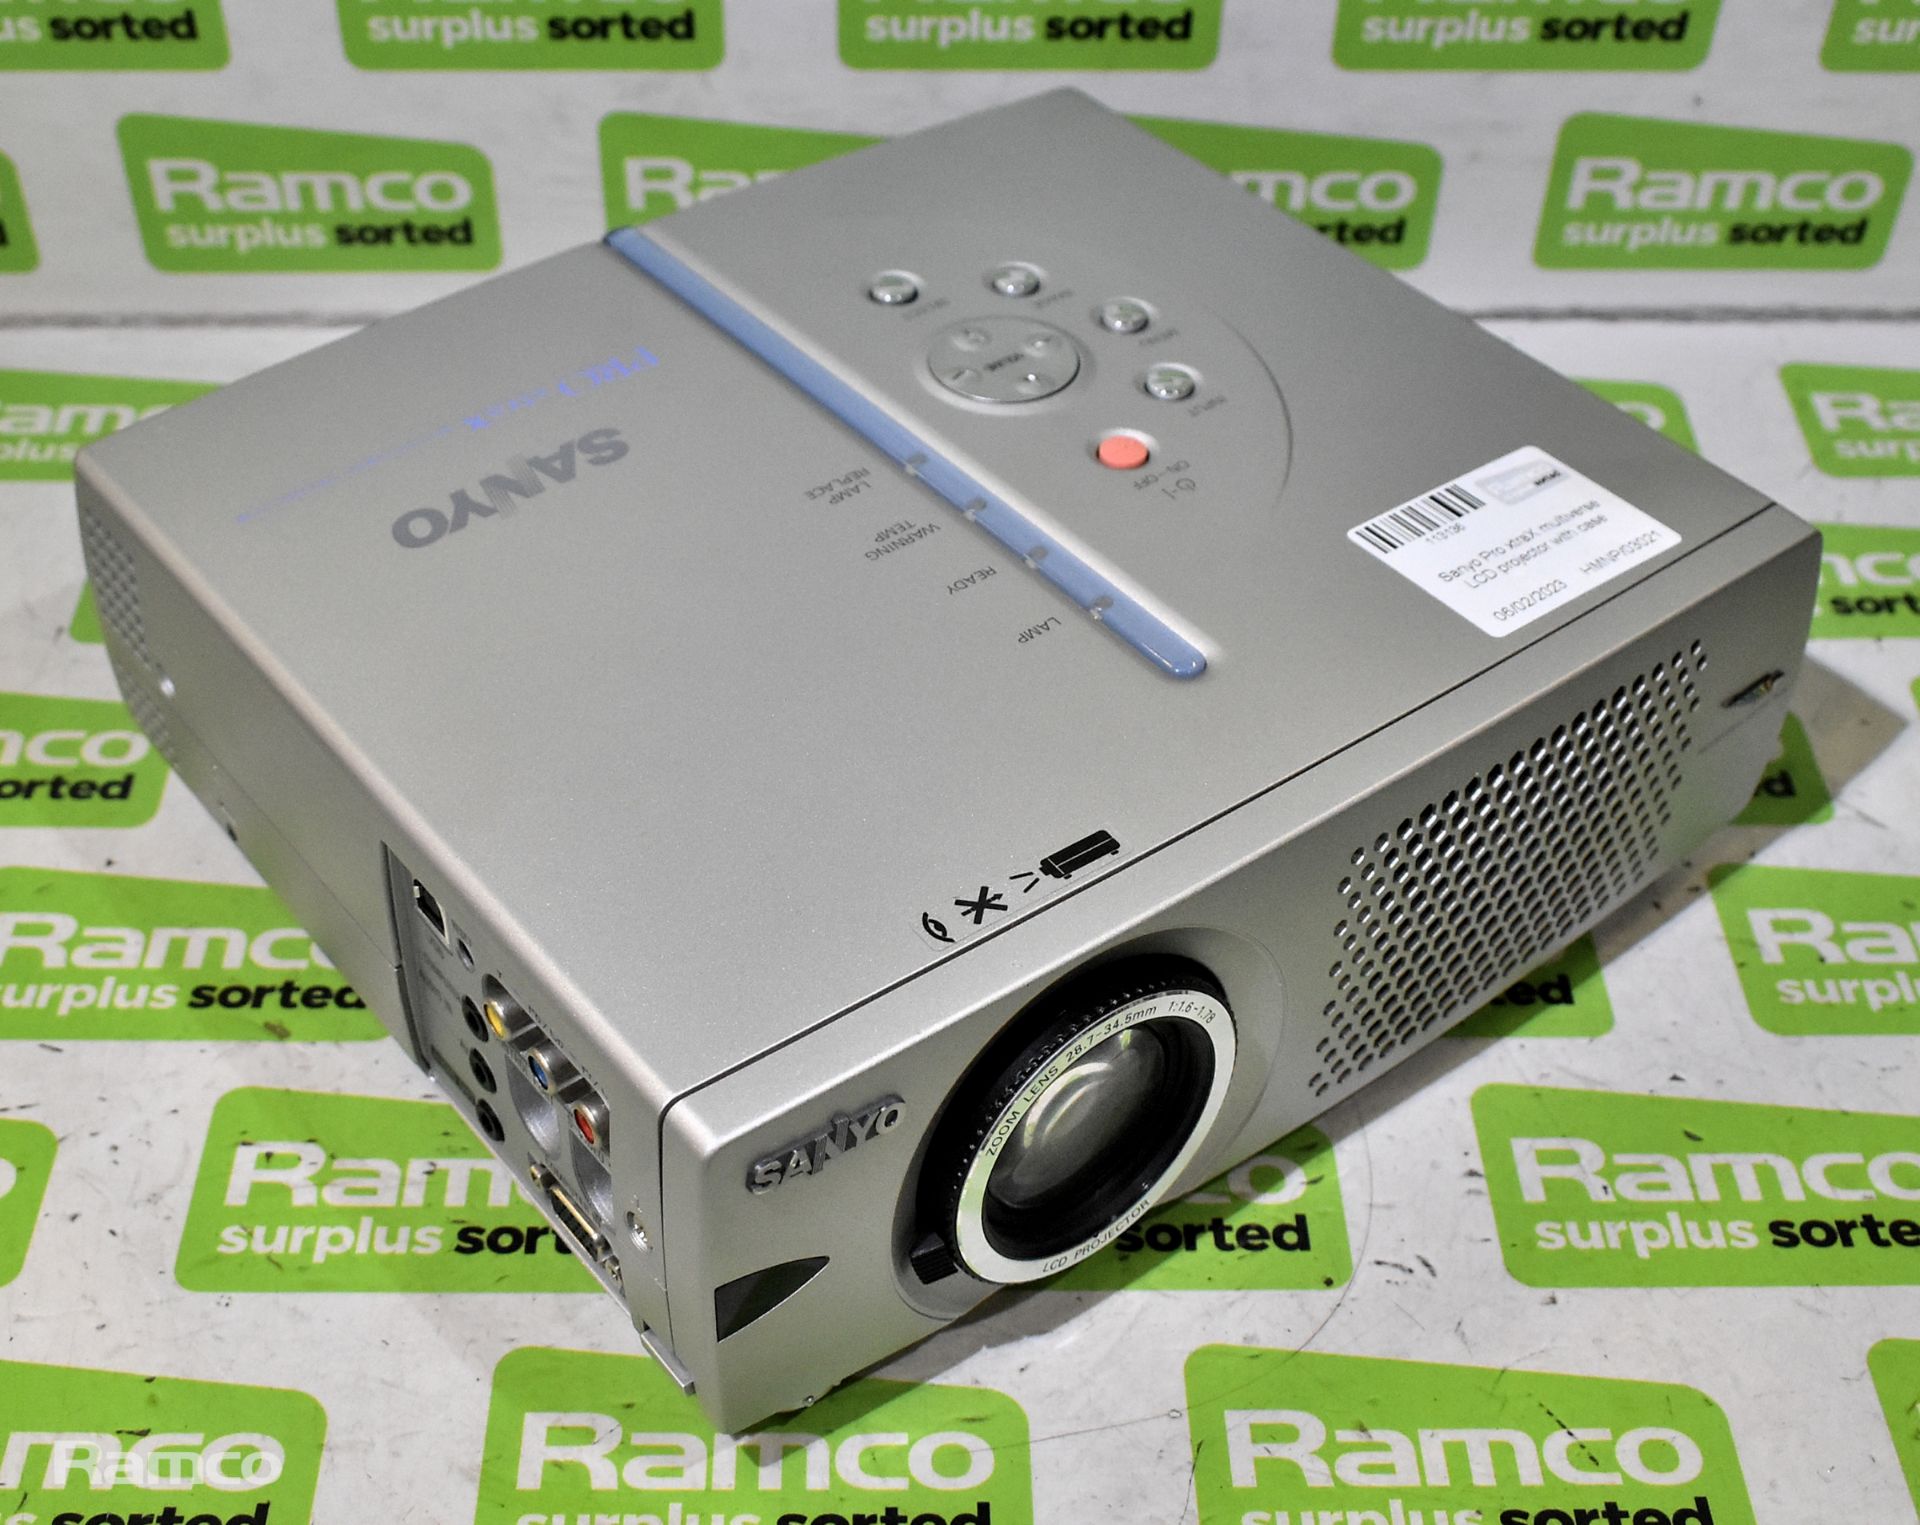 Sanyo Pro xtraX multiverse LCD projector with case - Image 2 of 4